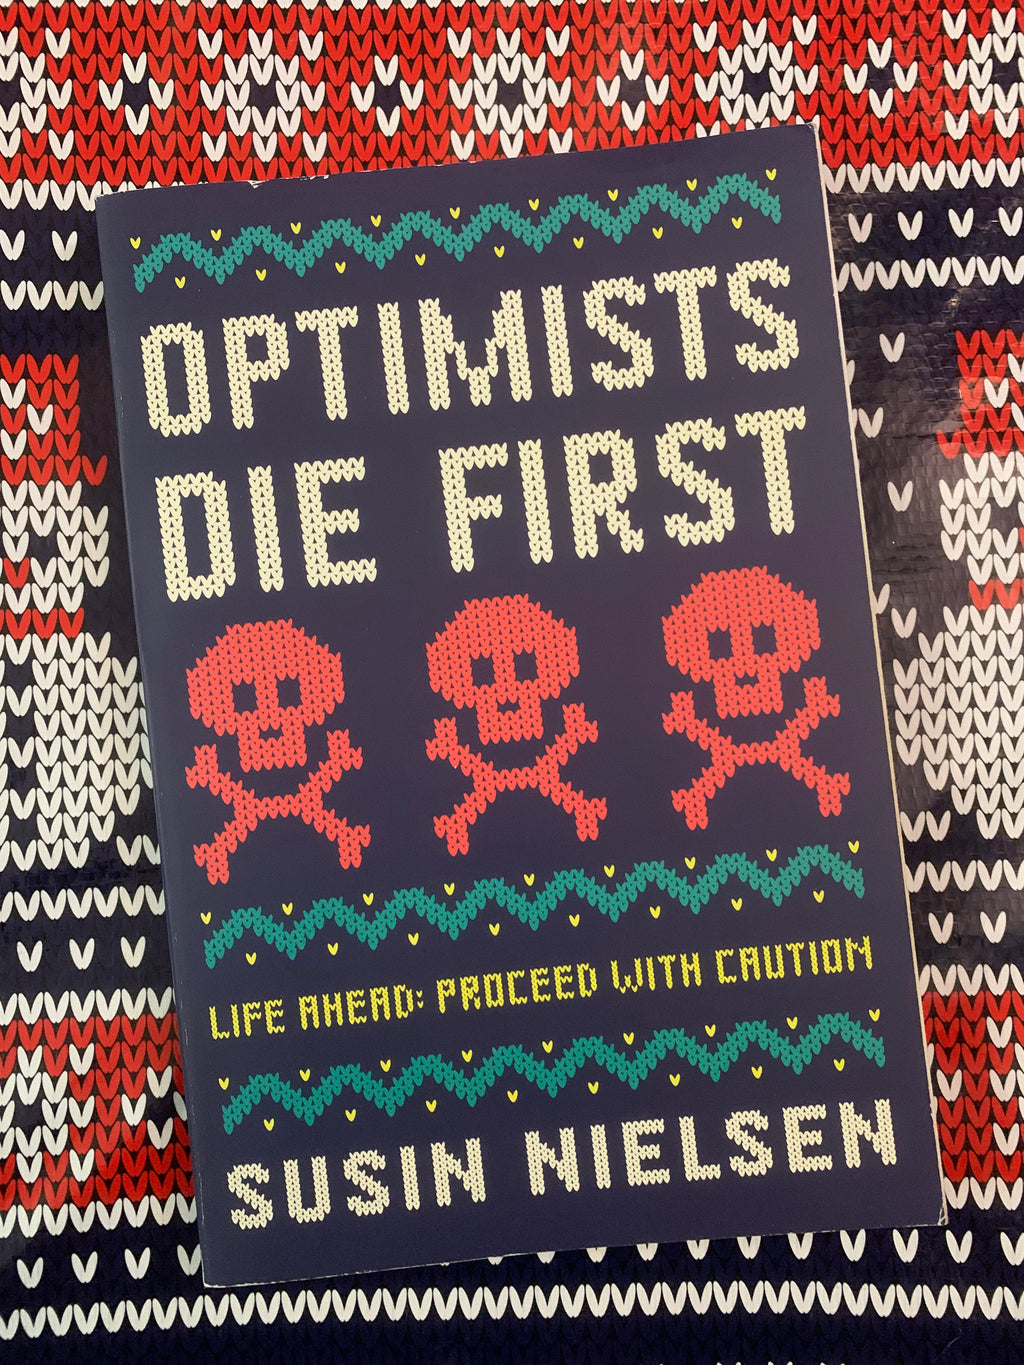 Optimists Die First: Life Ahead- Proceed with Caution- By Susin Nielsen